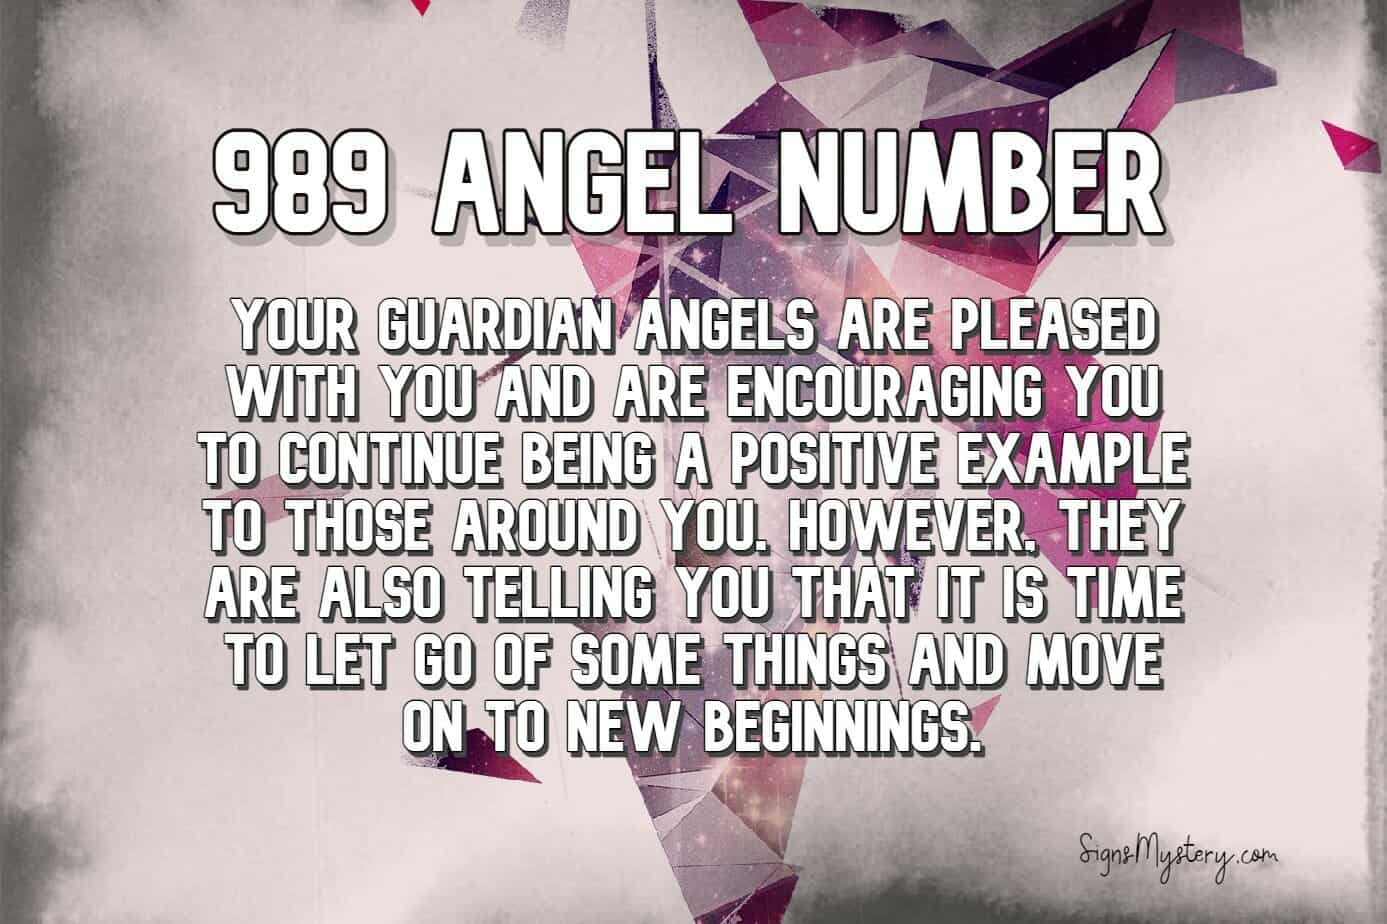 989 angel number meaning